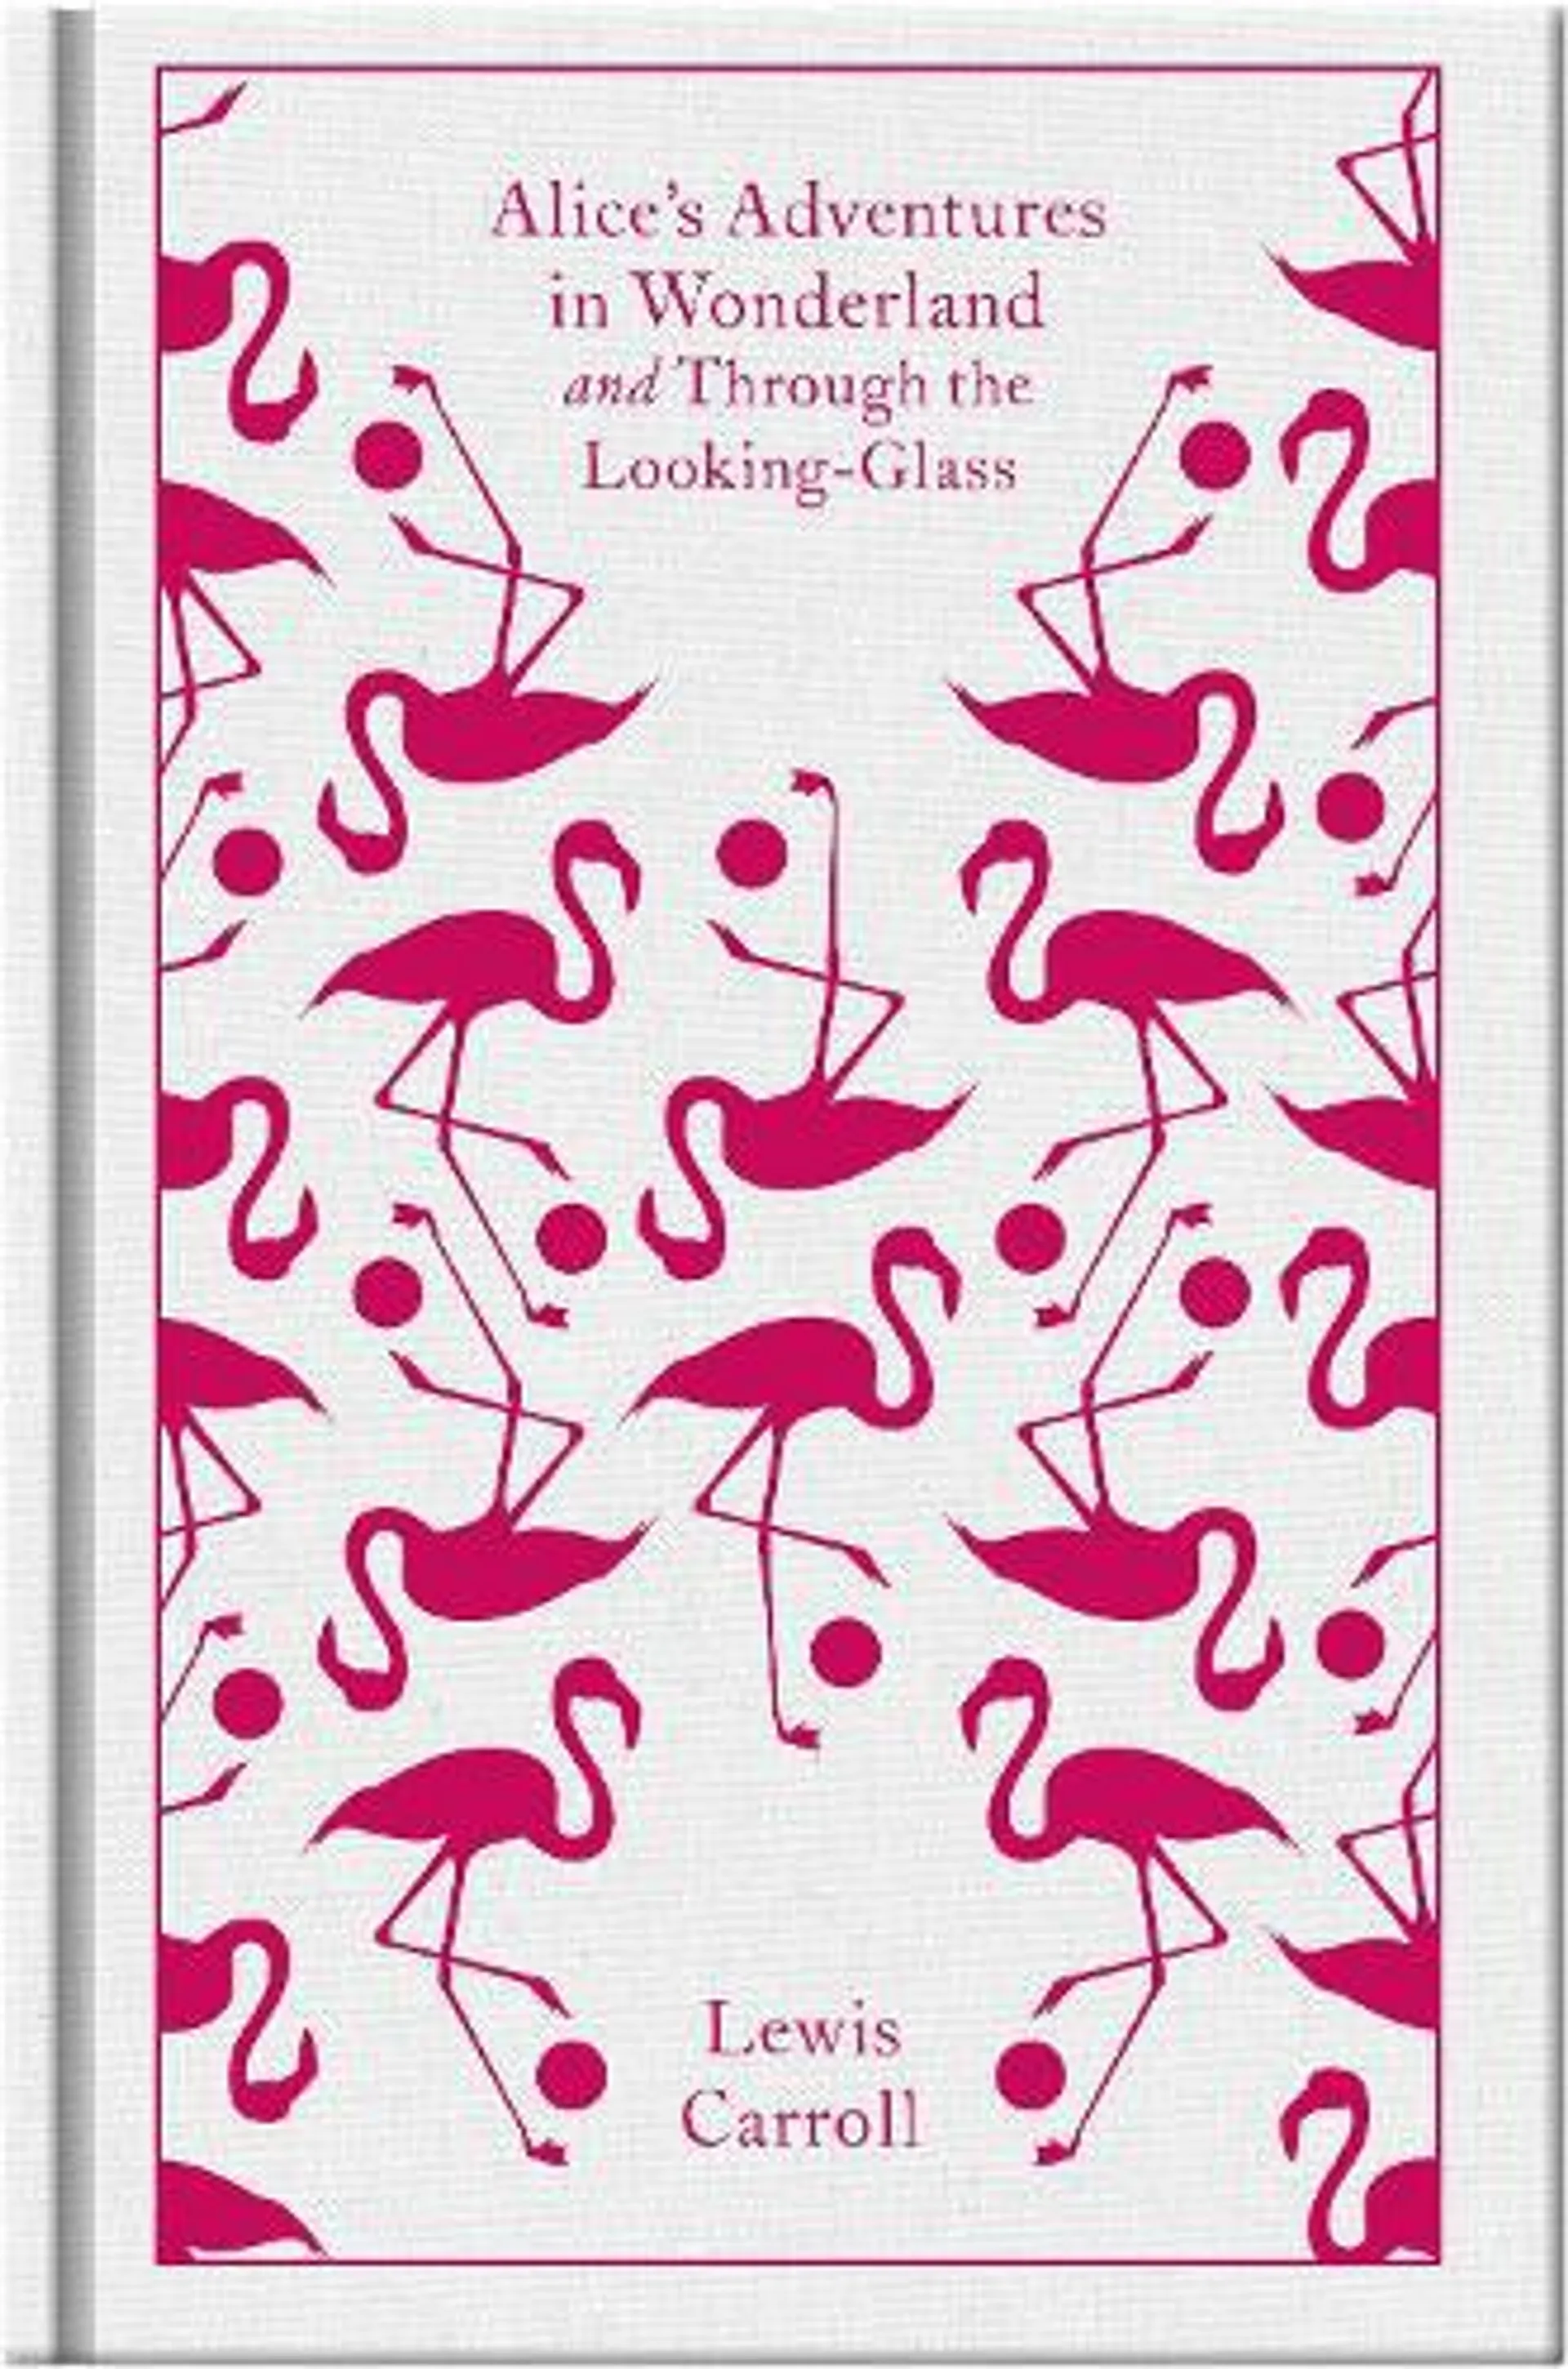 Alice's Adventures in Wonderland and Through the Looking Glass - Penguin Clothbound Classics (Hardback)